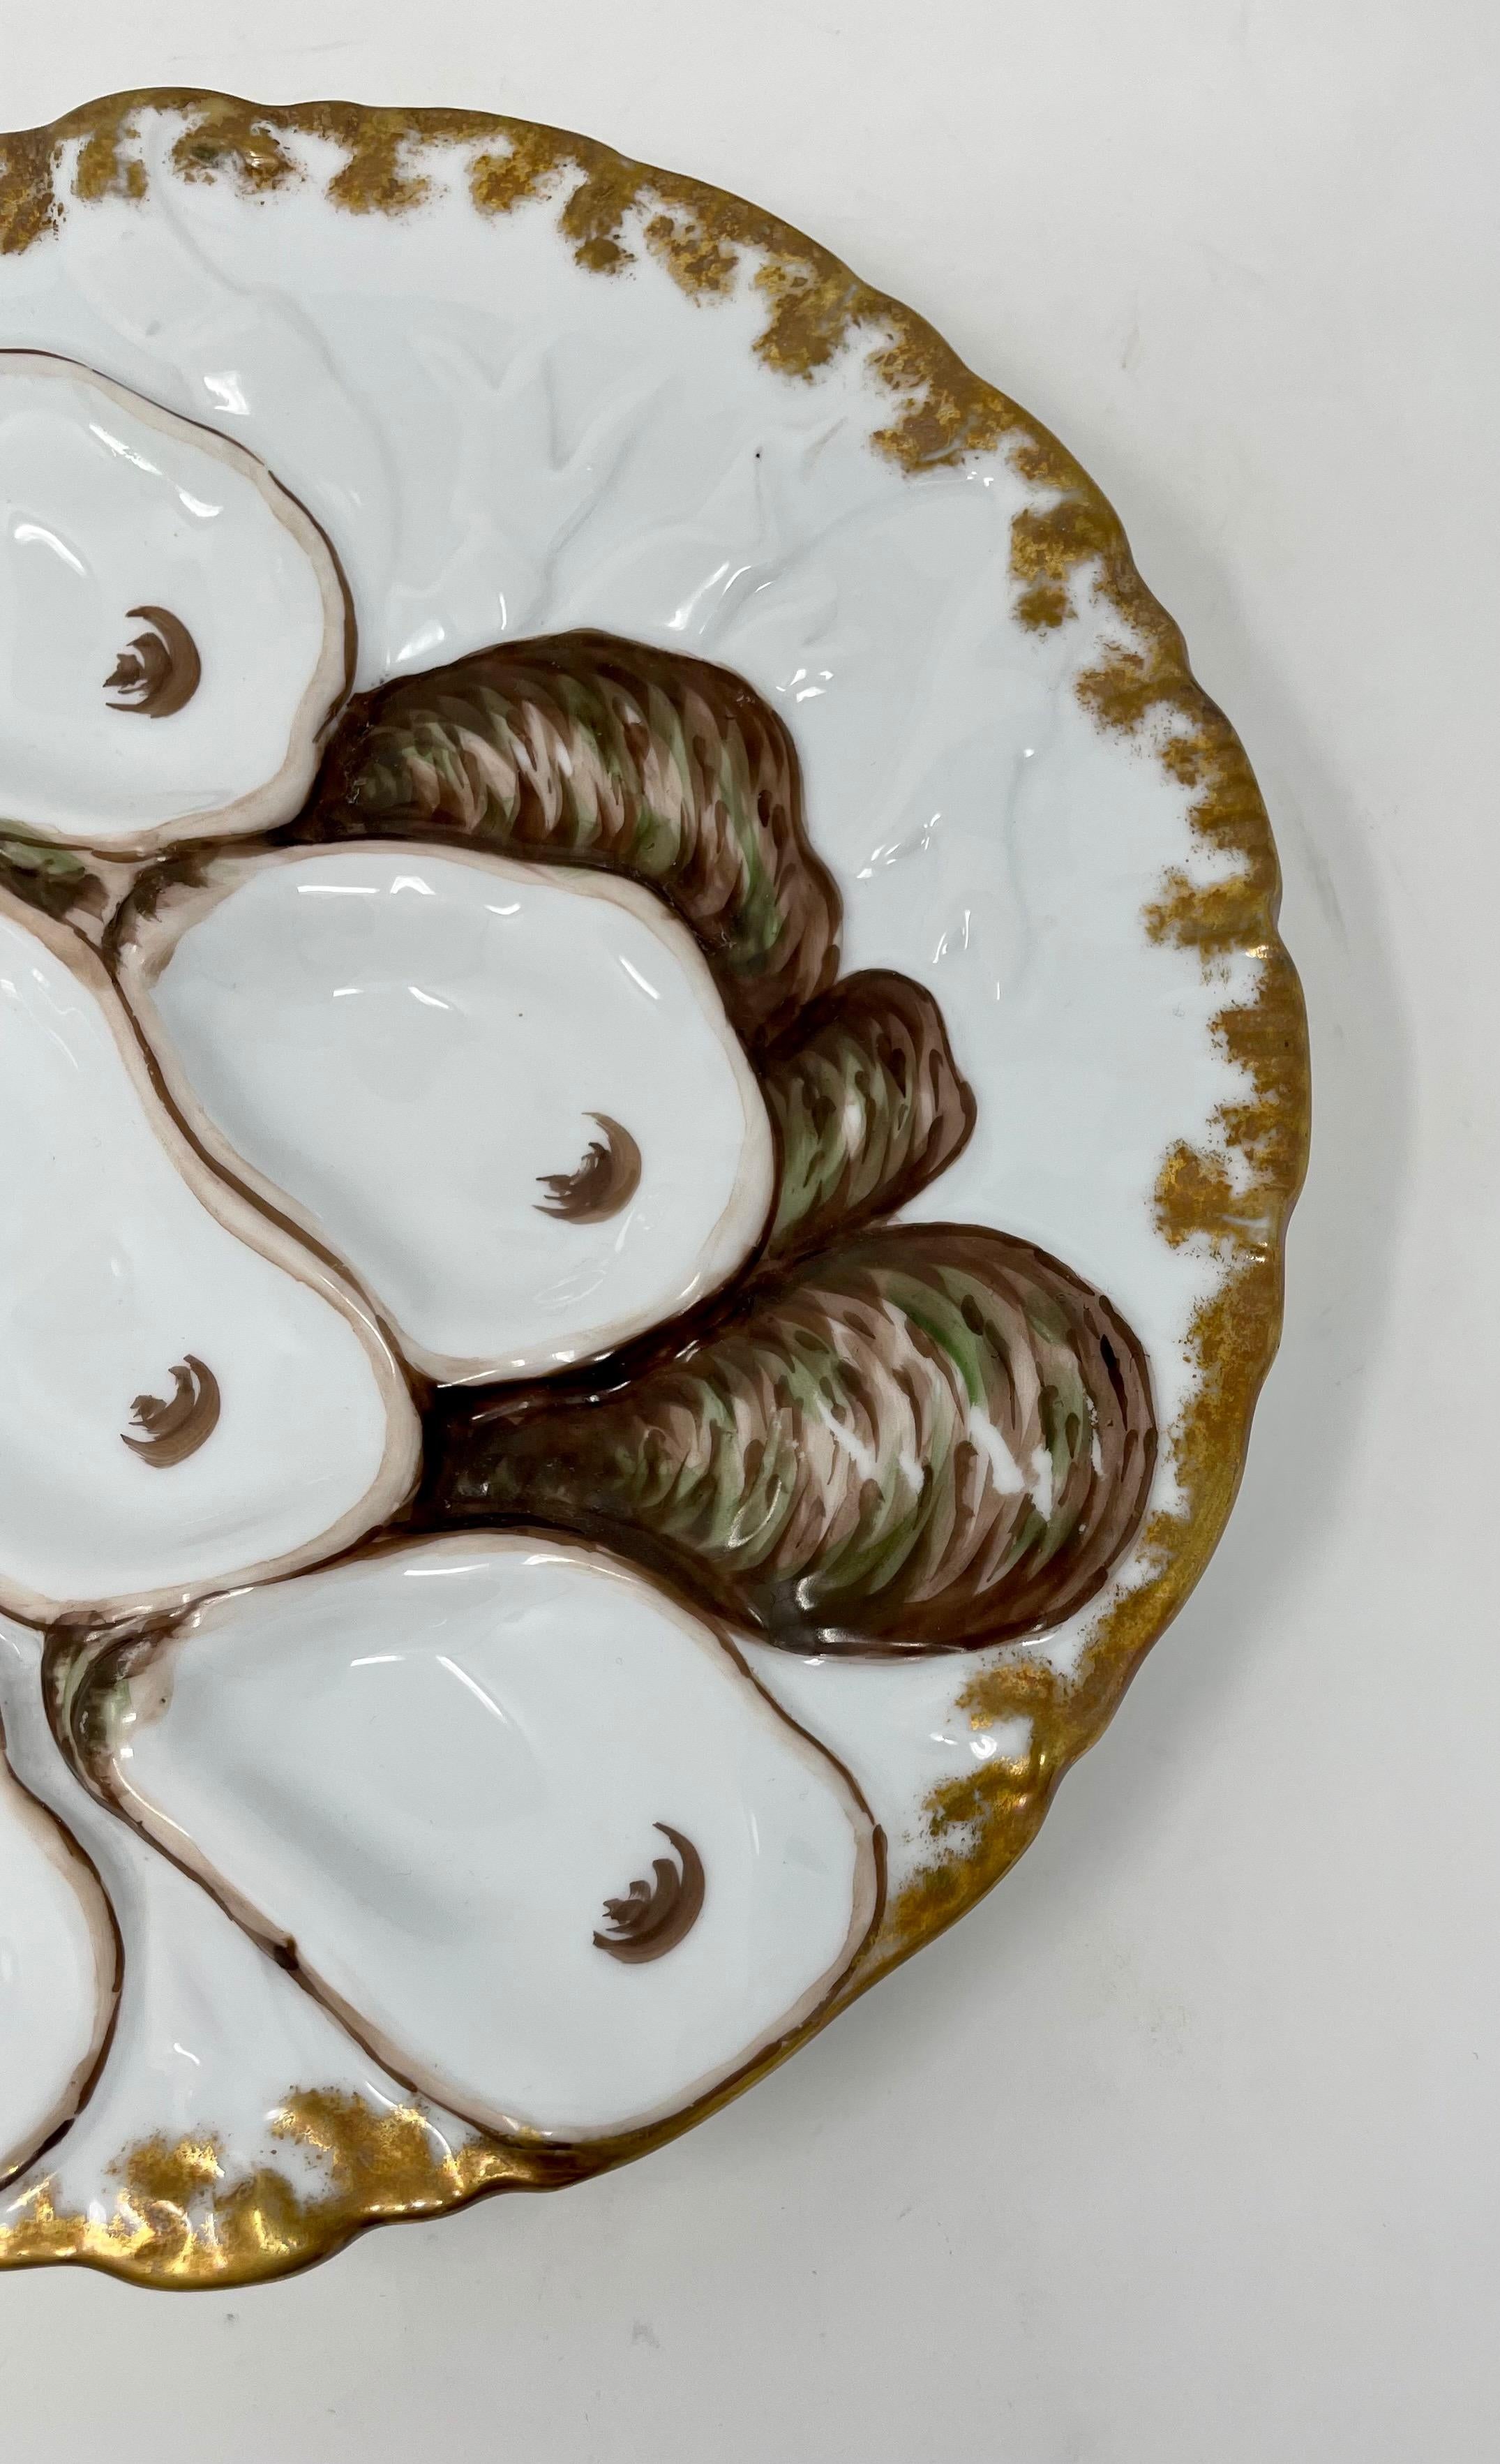 Antique German hand-painted porcelain oyster plate made by 